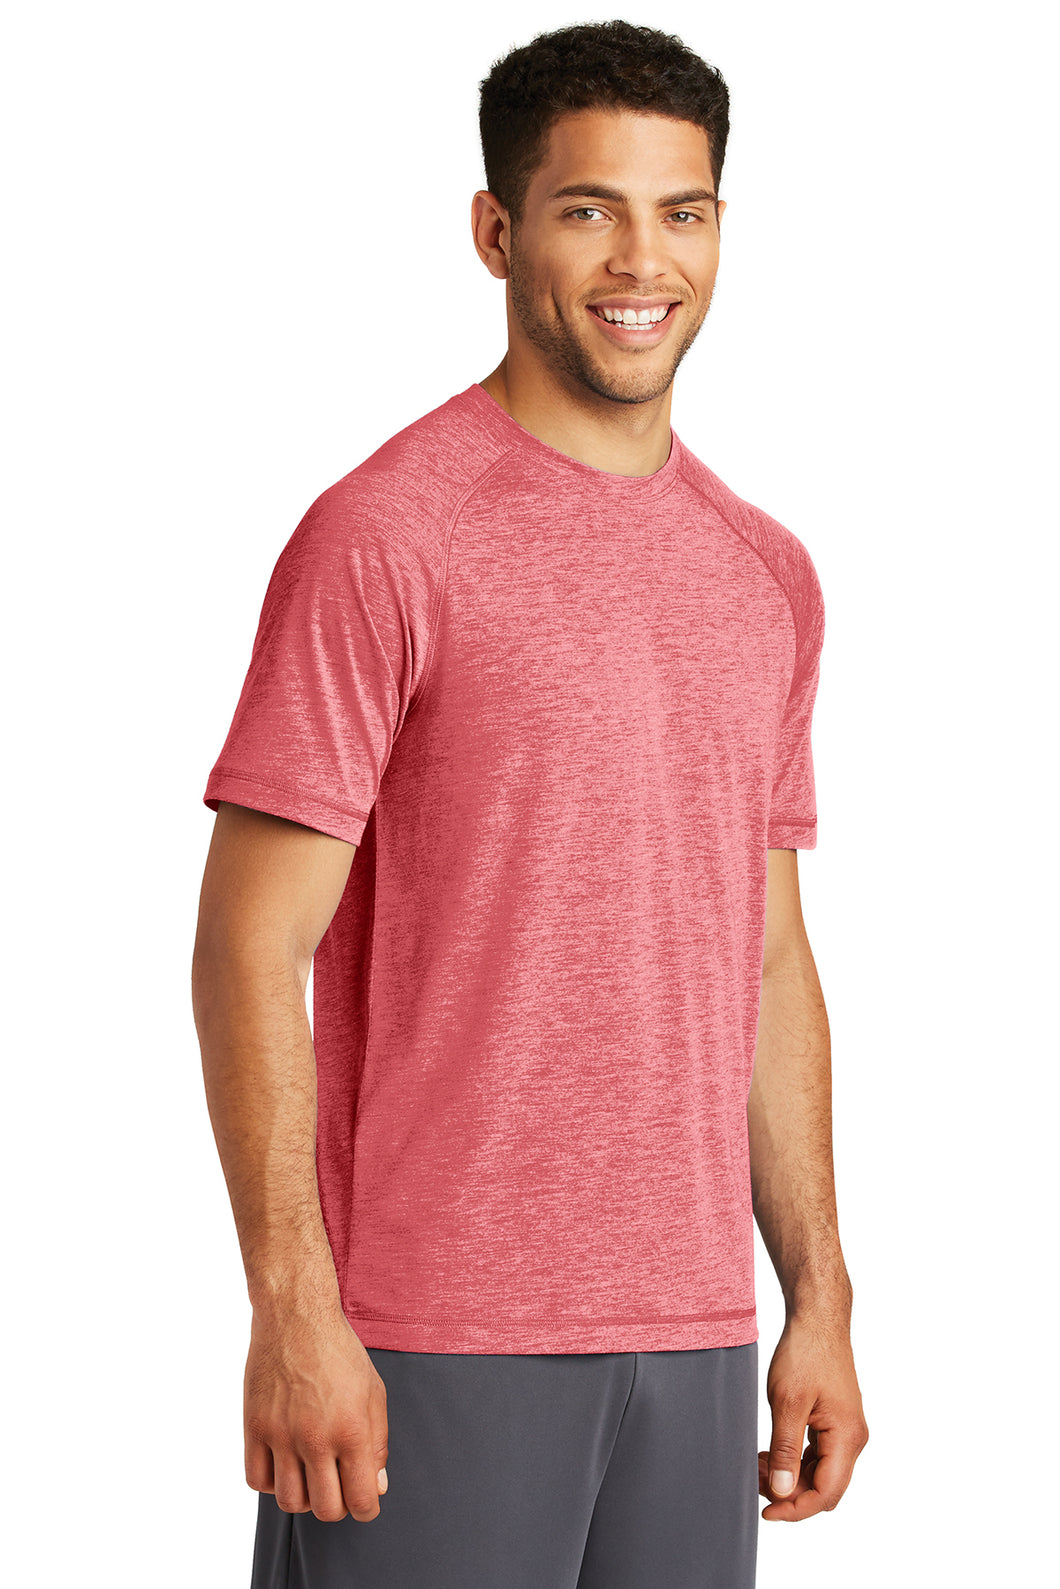 Fusion Performance Top - Red